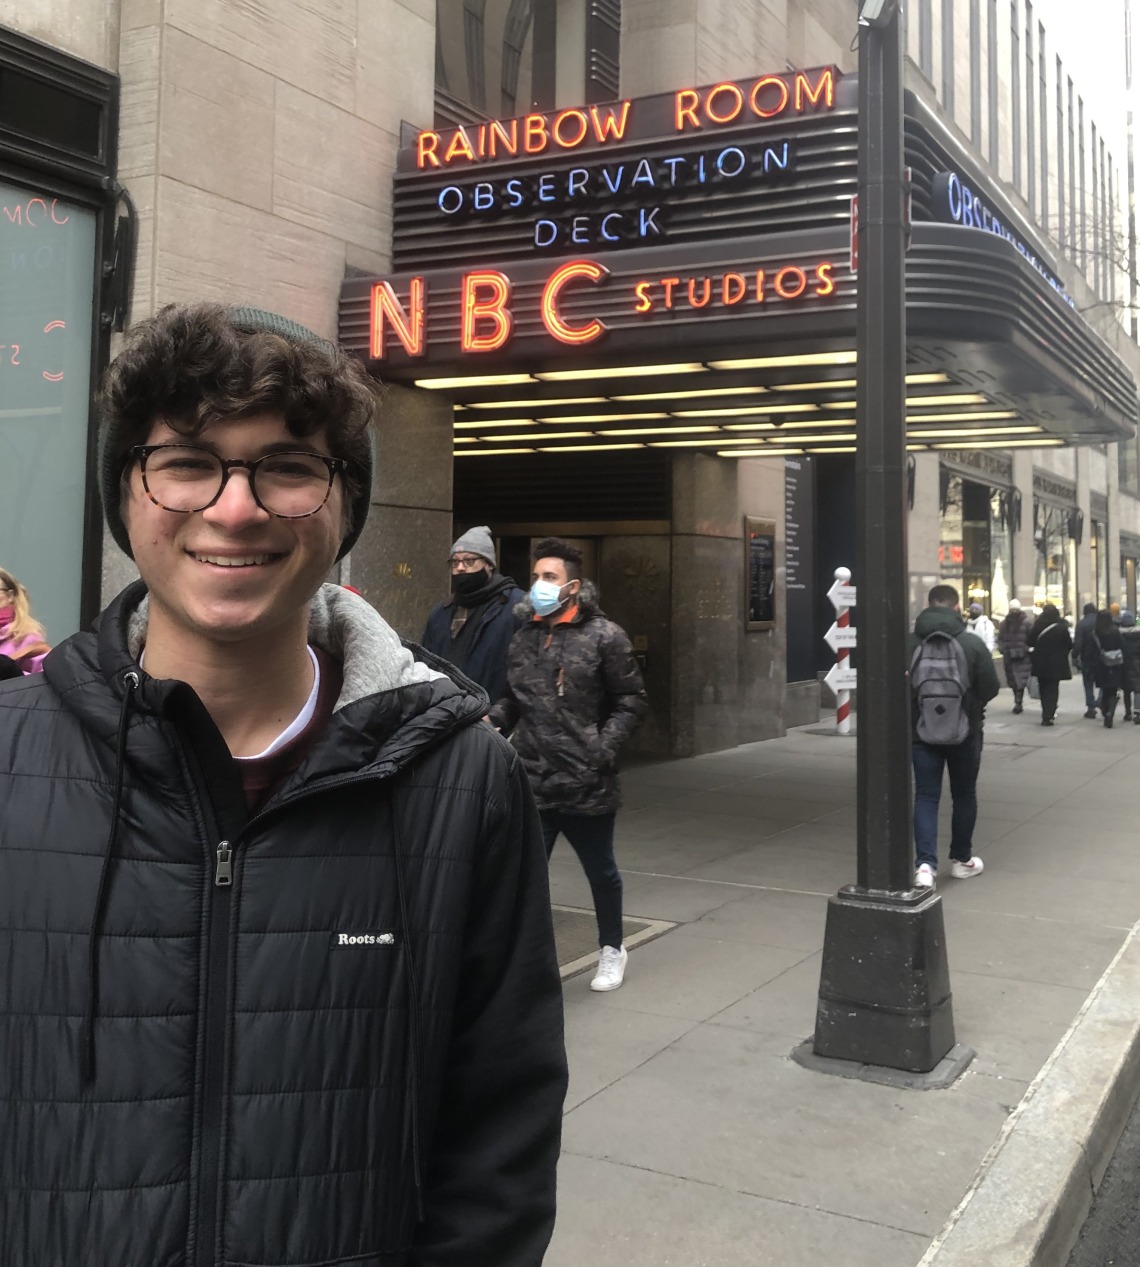 Jackson Freed standing in front of Rainbow Room Observation Deck at NBC Studios.